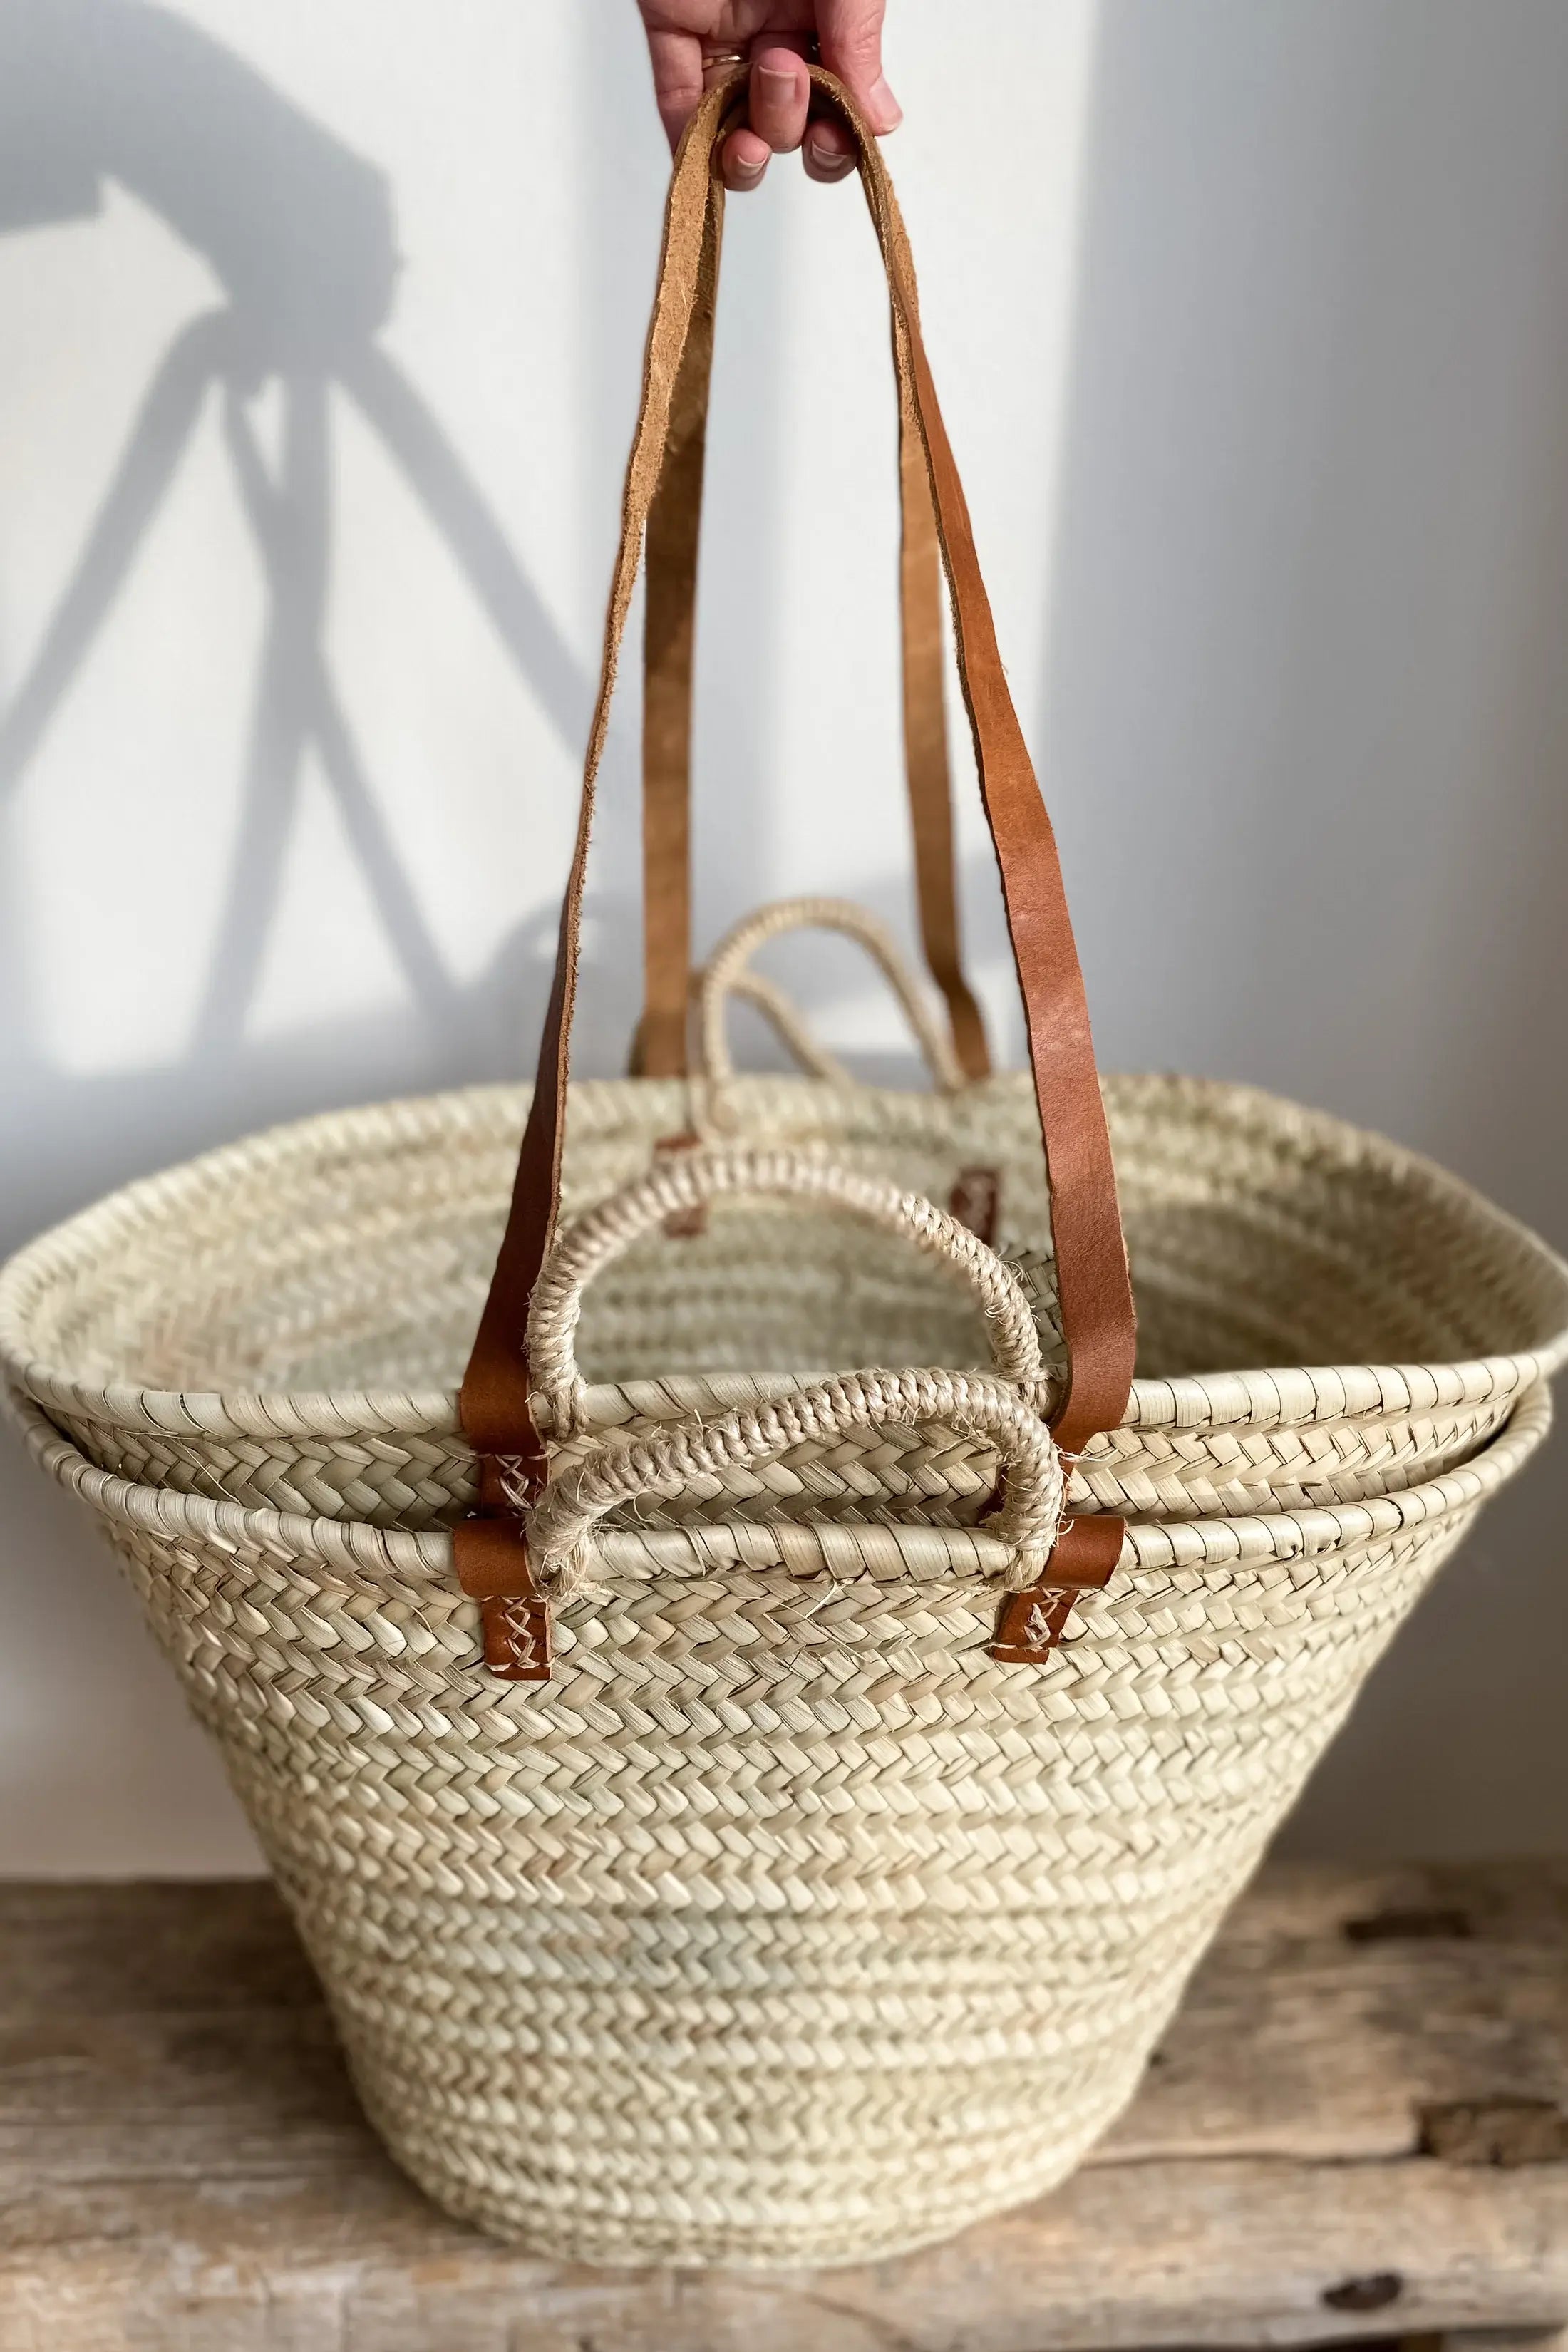 French market basket with double leather straps